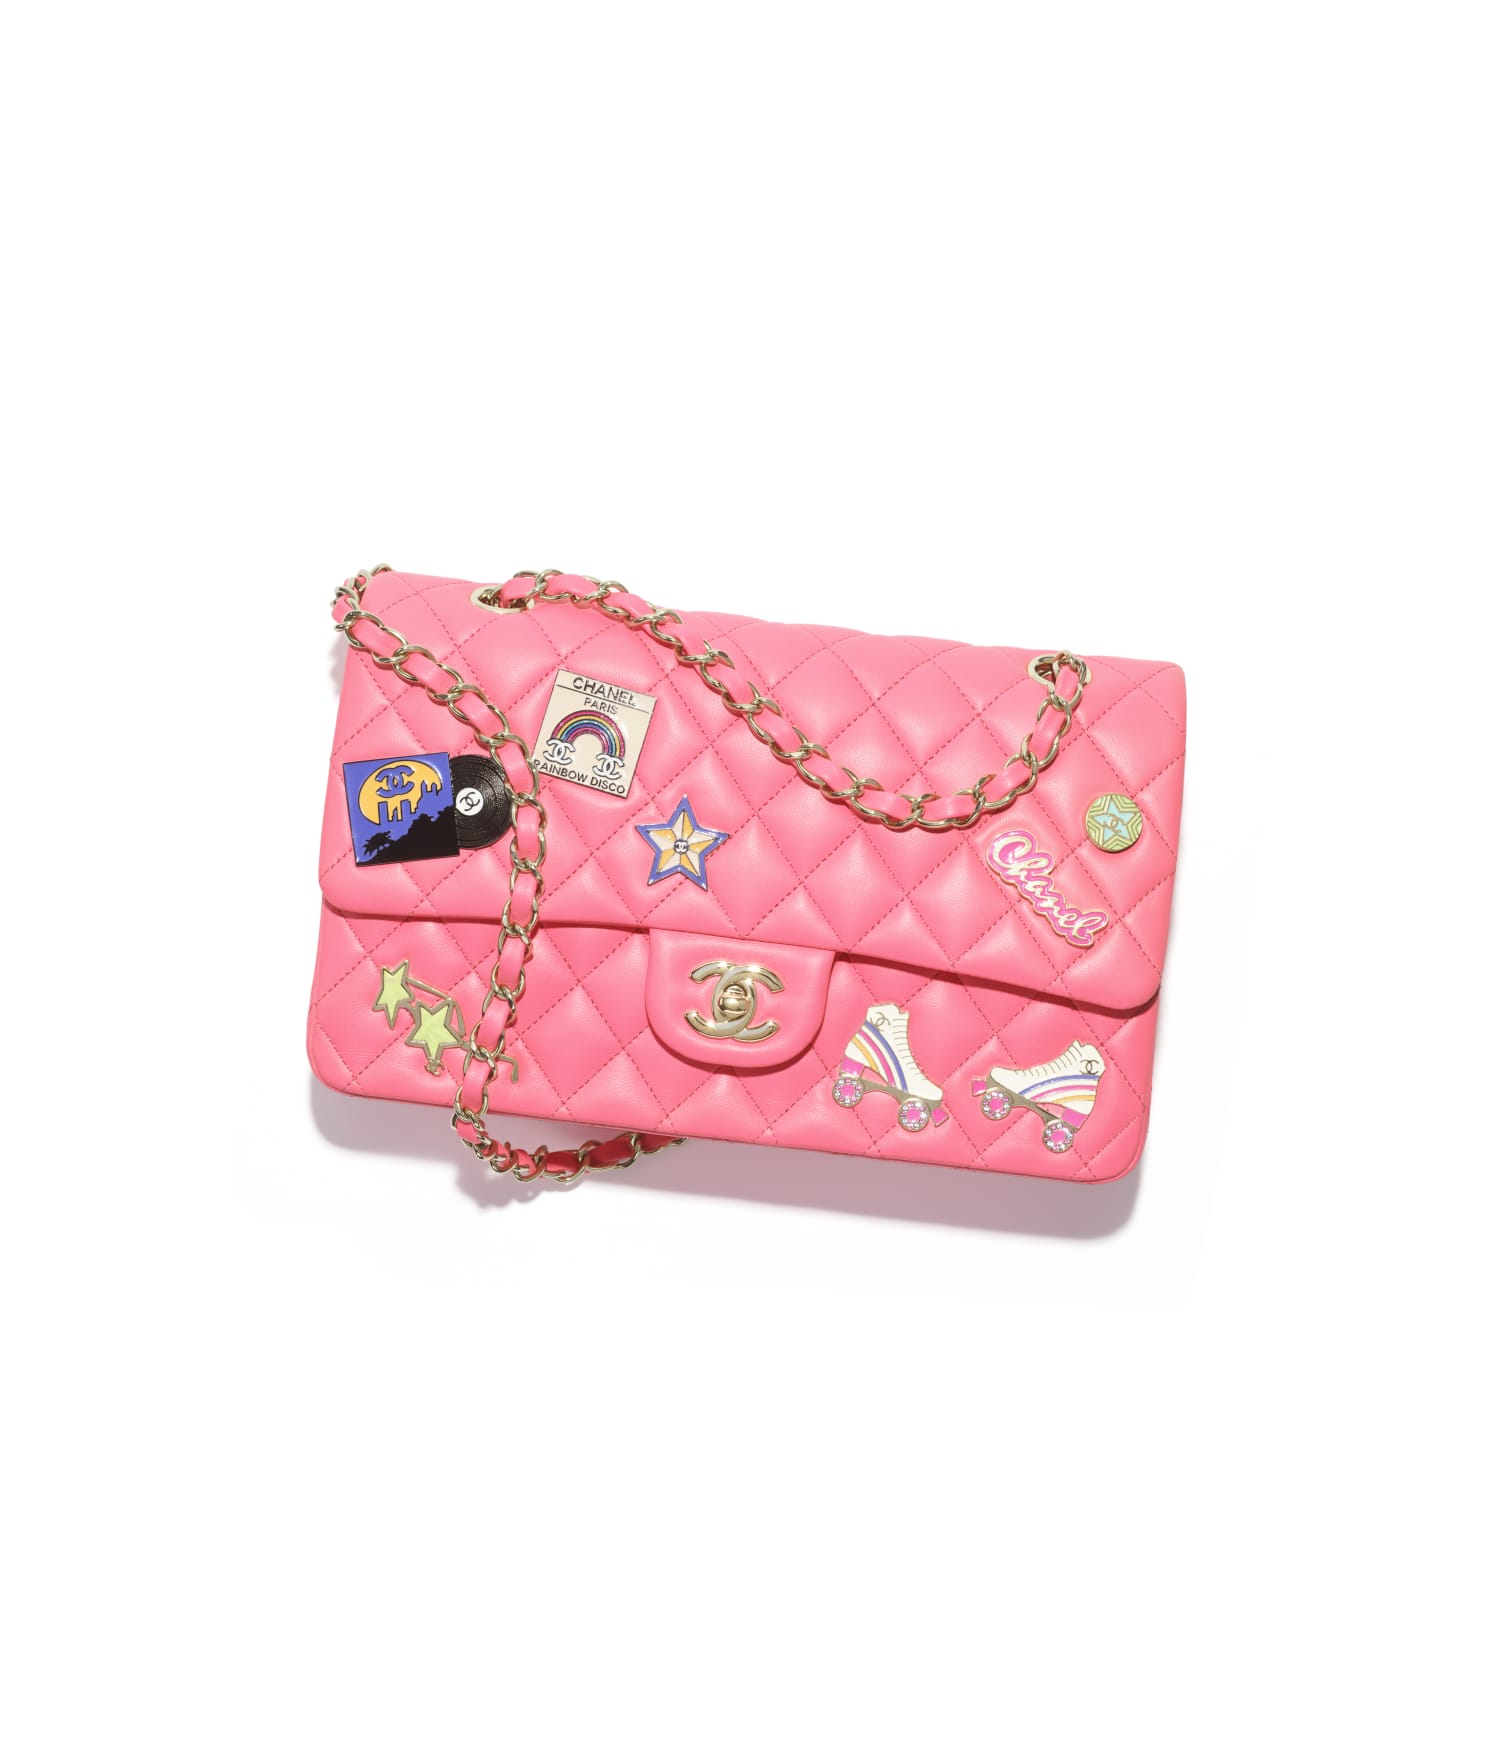 chanel_1112-bag-in-pink-leather-and-metal-embellished-with-charms-a01112-b14967-ns836-hd-LD